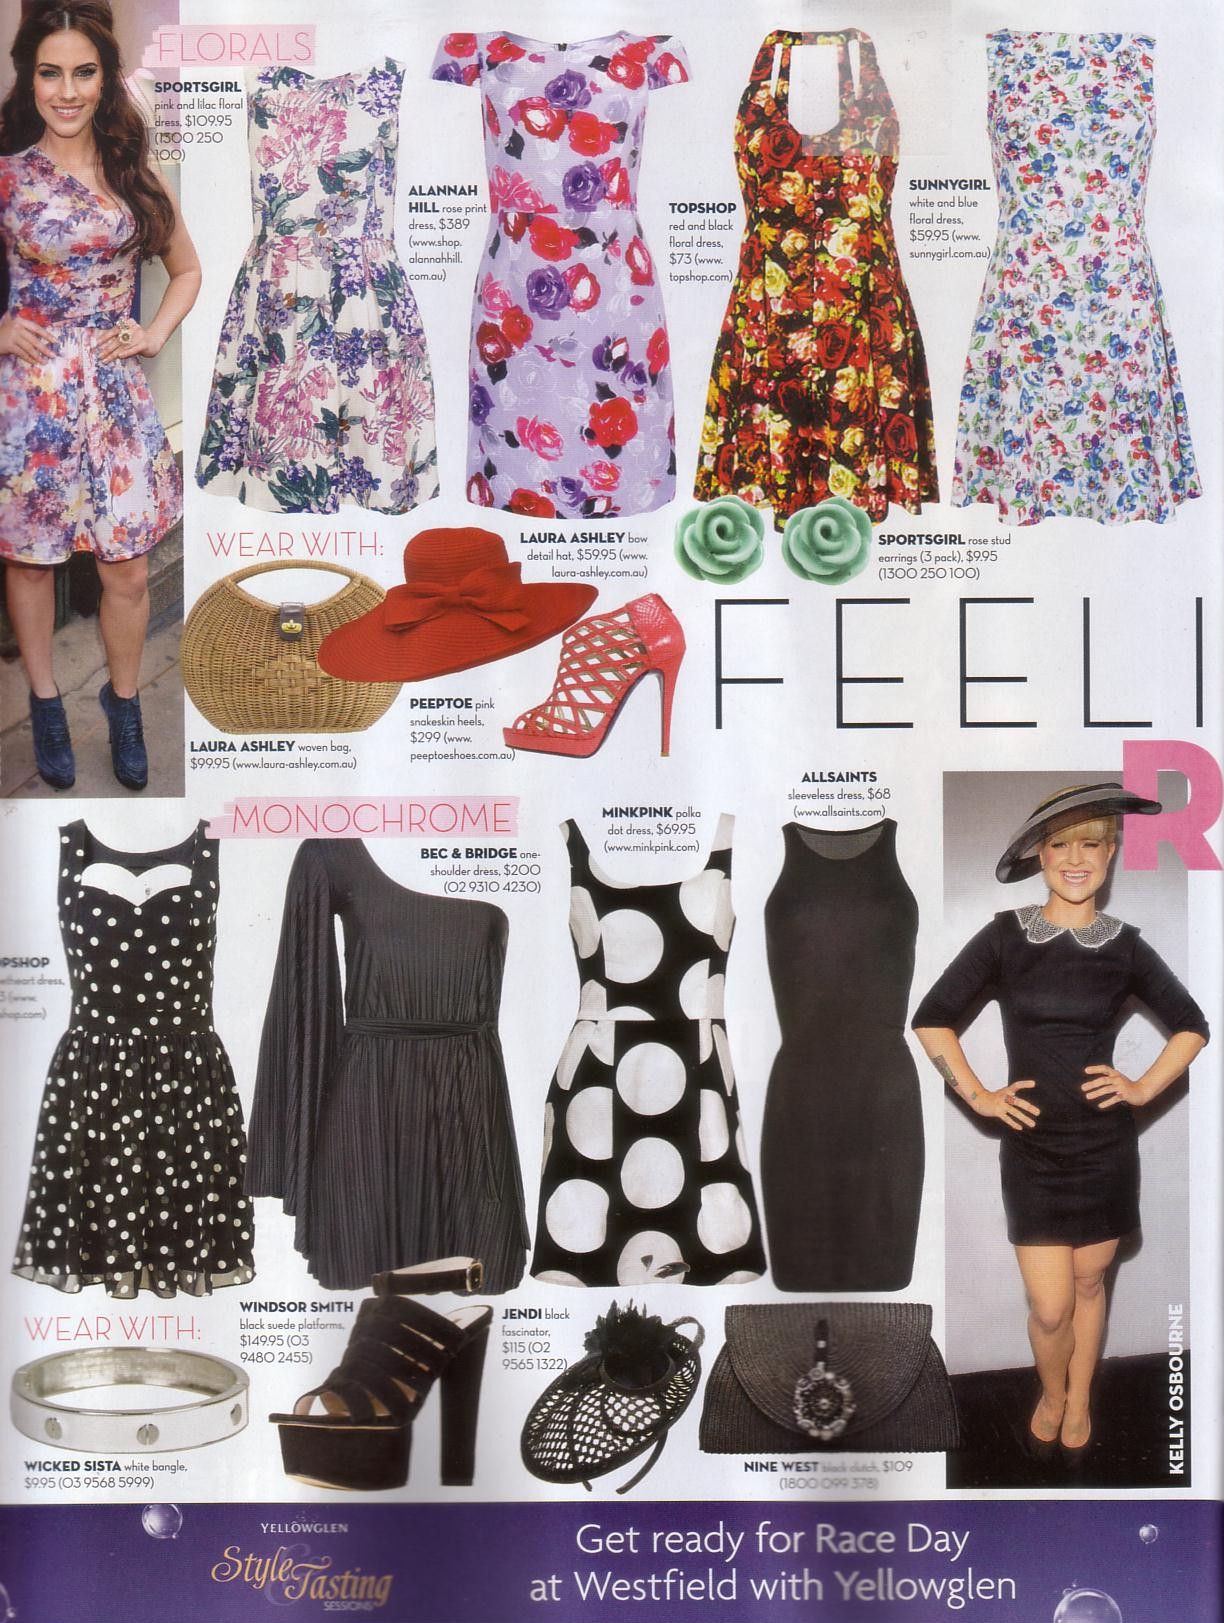 Sunny Girl – Famous Oct 10 2011 – Sunny girl vintage inspired floral dress